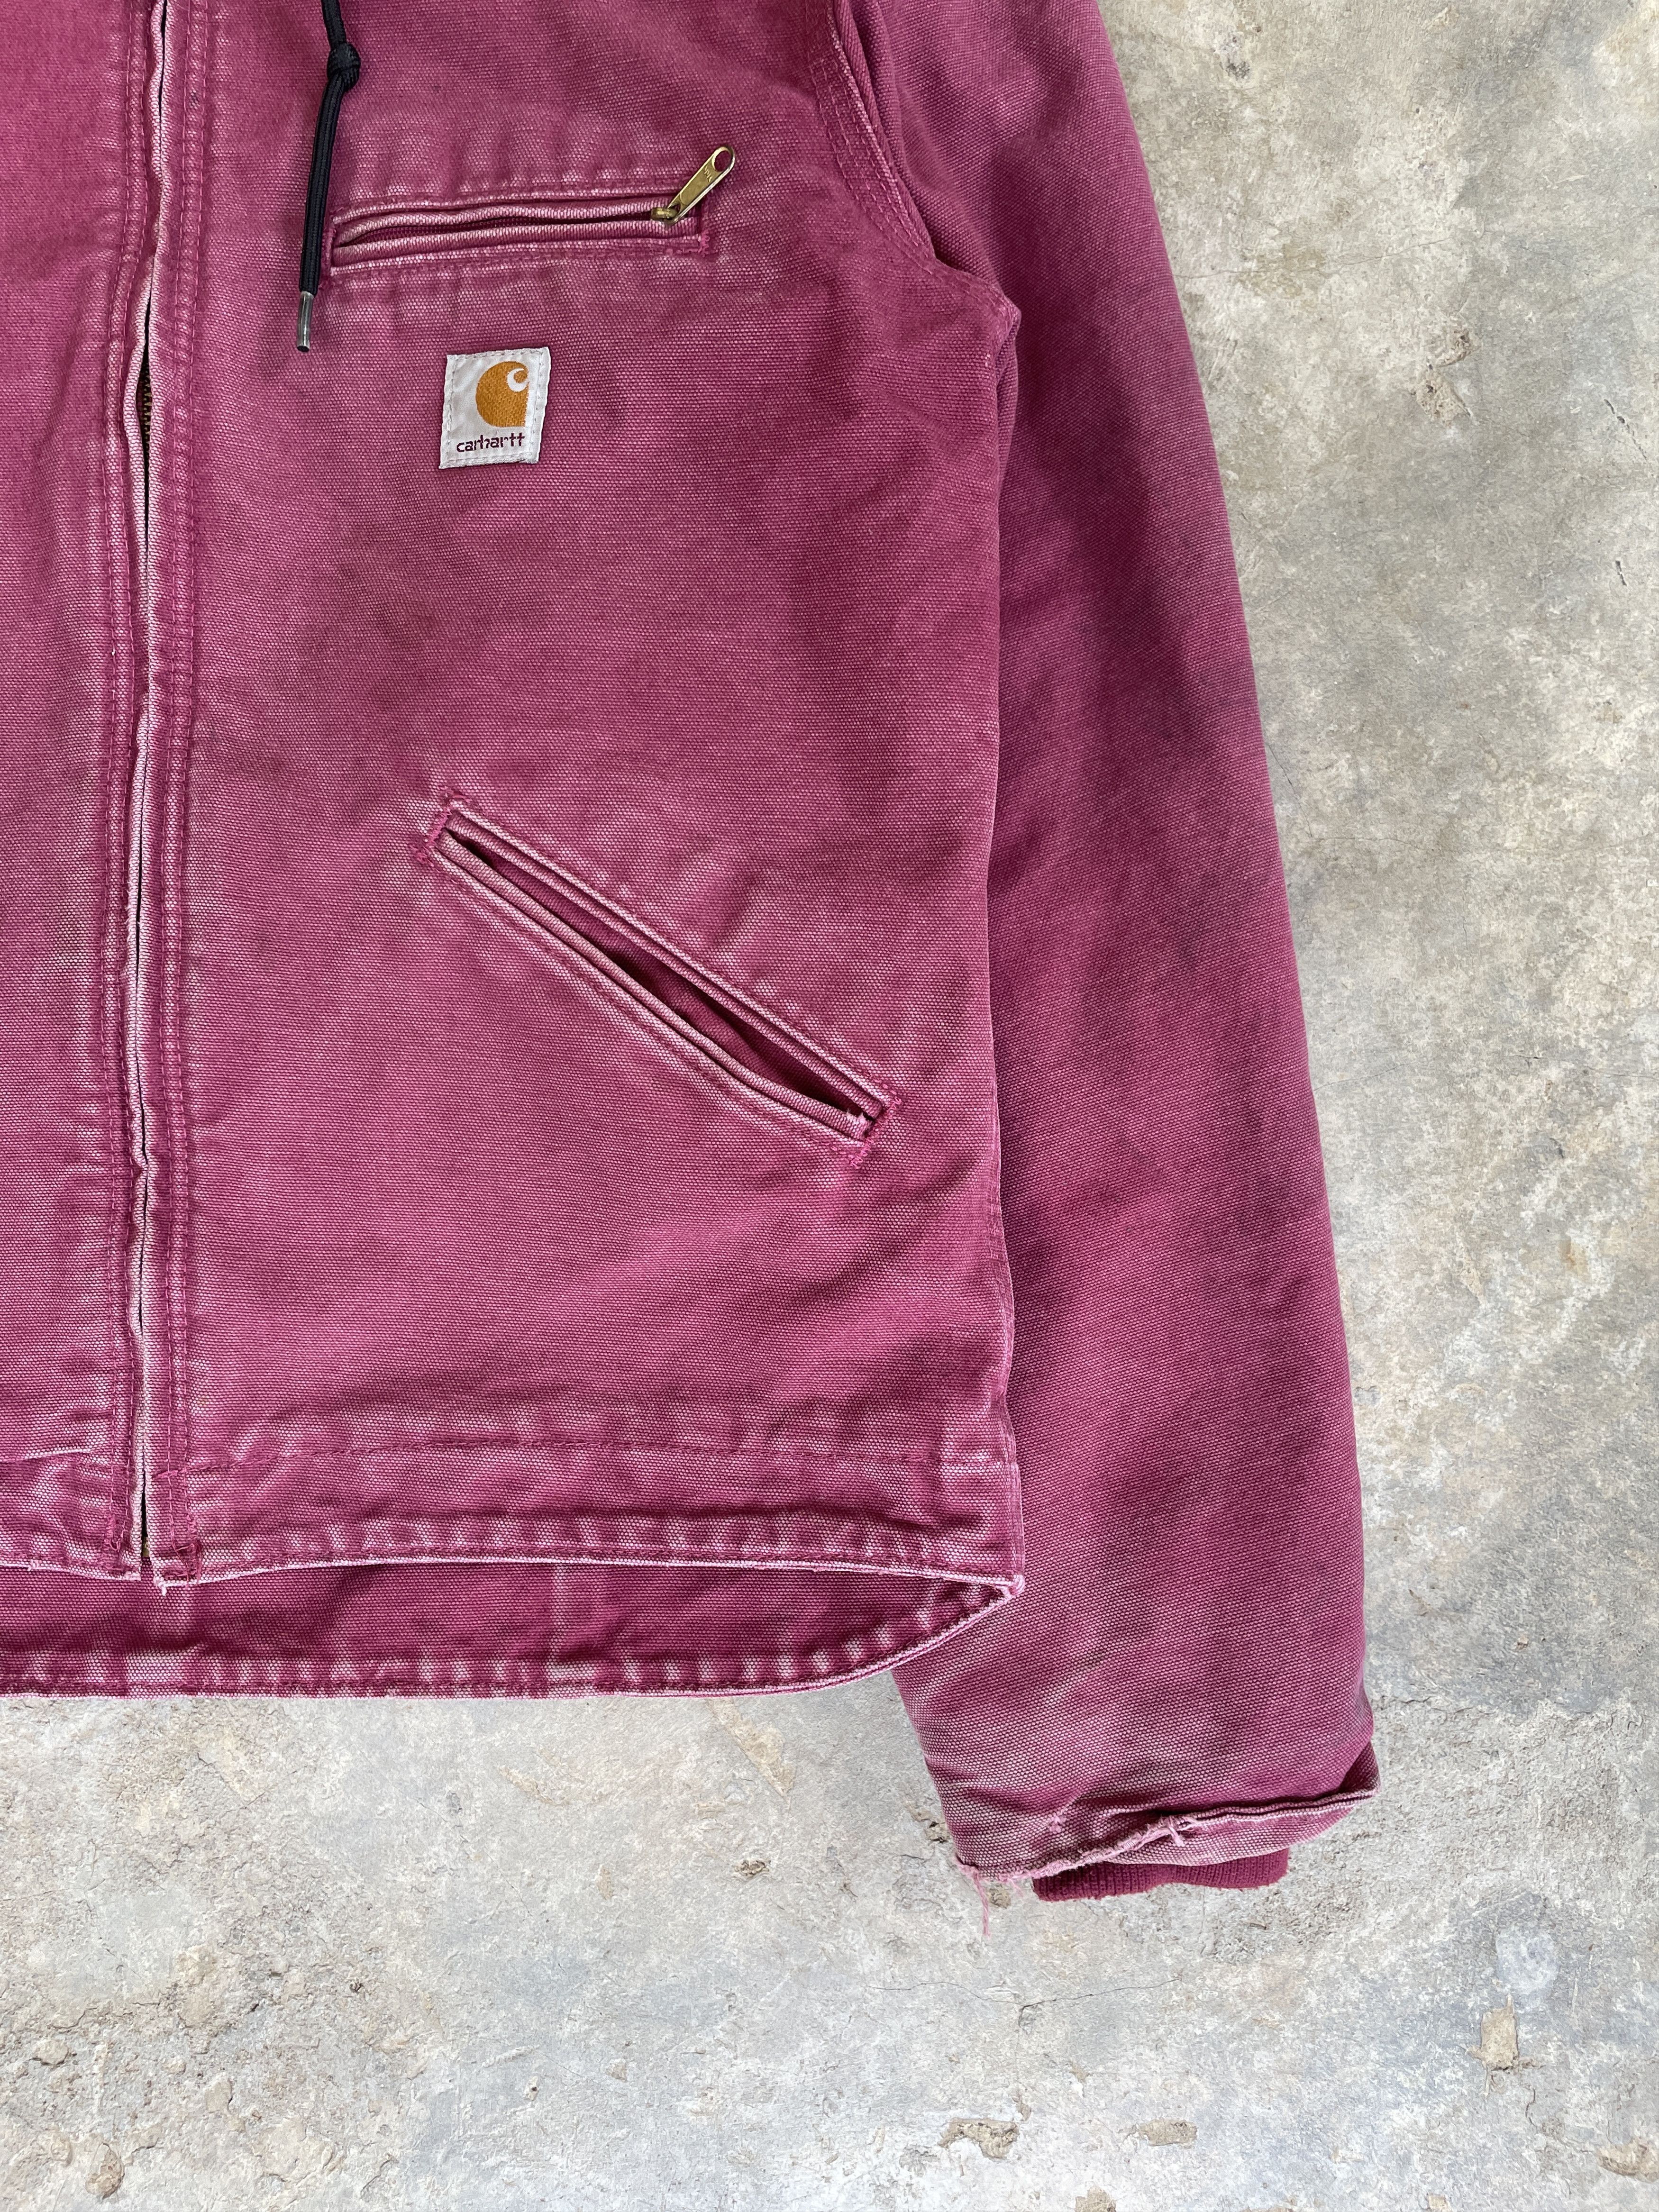 Vintage 1990s Sun Faded Pink Carhartt Jacket Size US S / EU 44-46 / 1 - 2 Preview